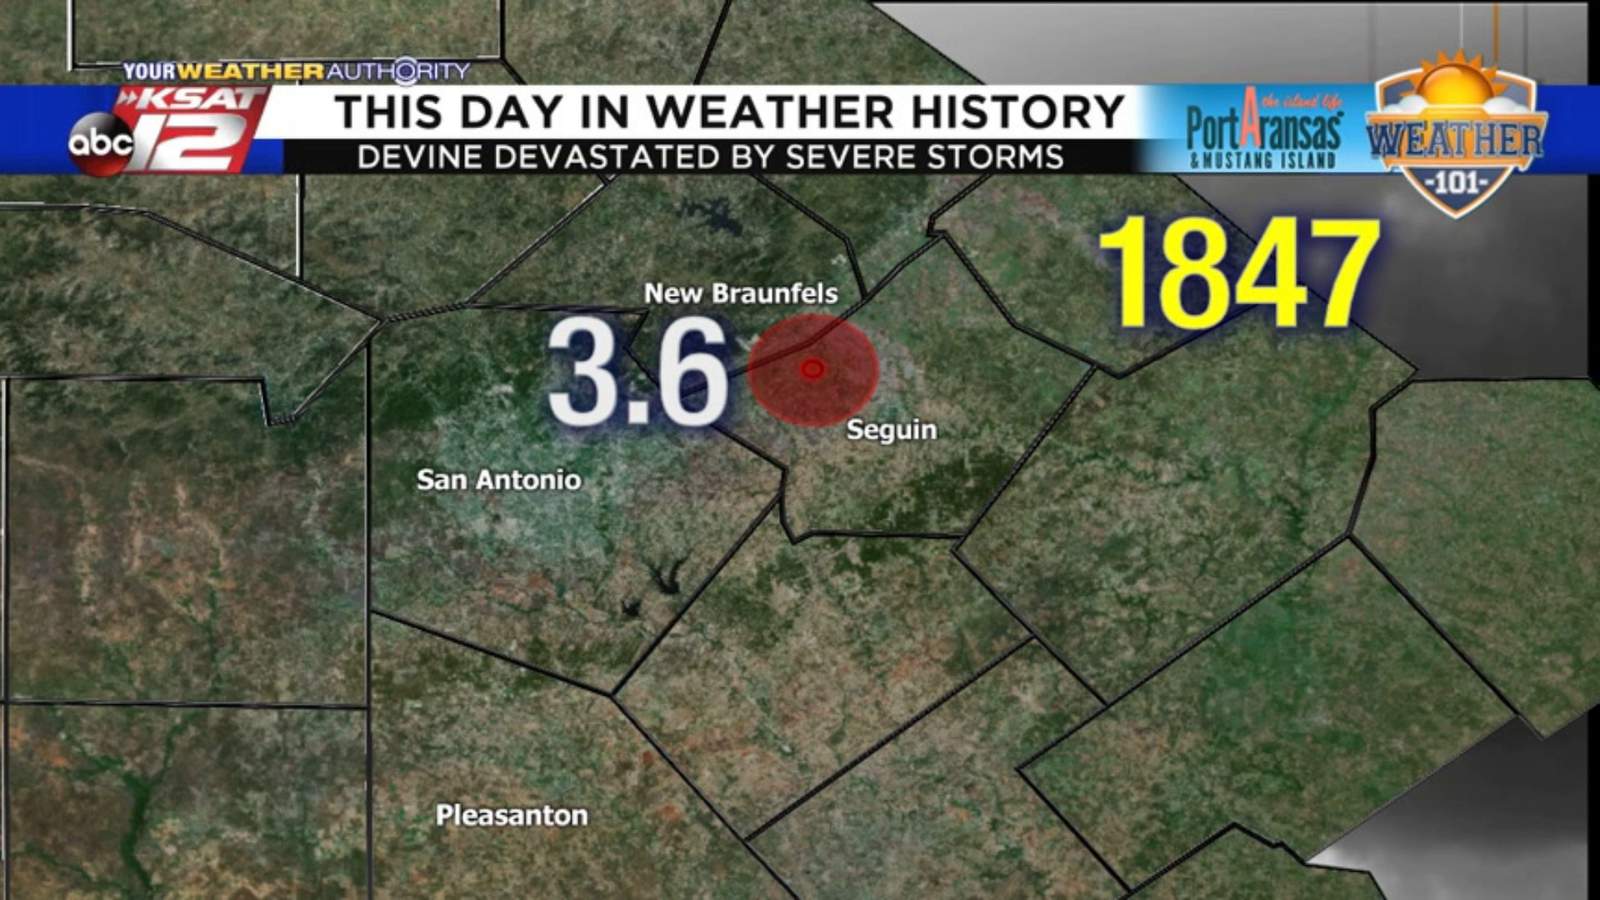 This Day in Weather History: February 13th